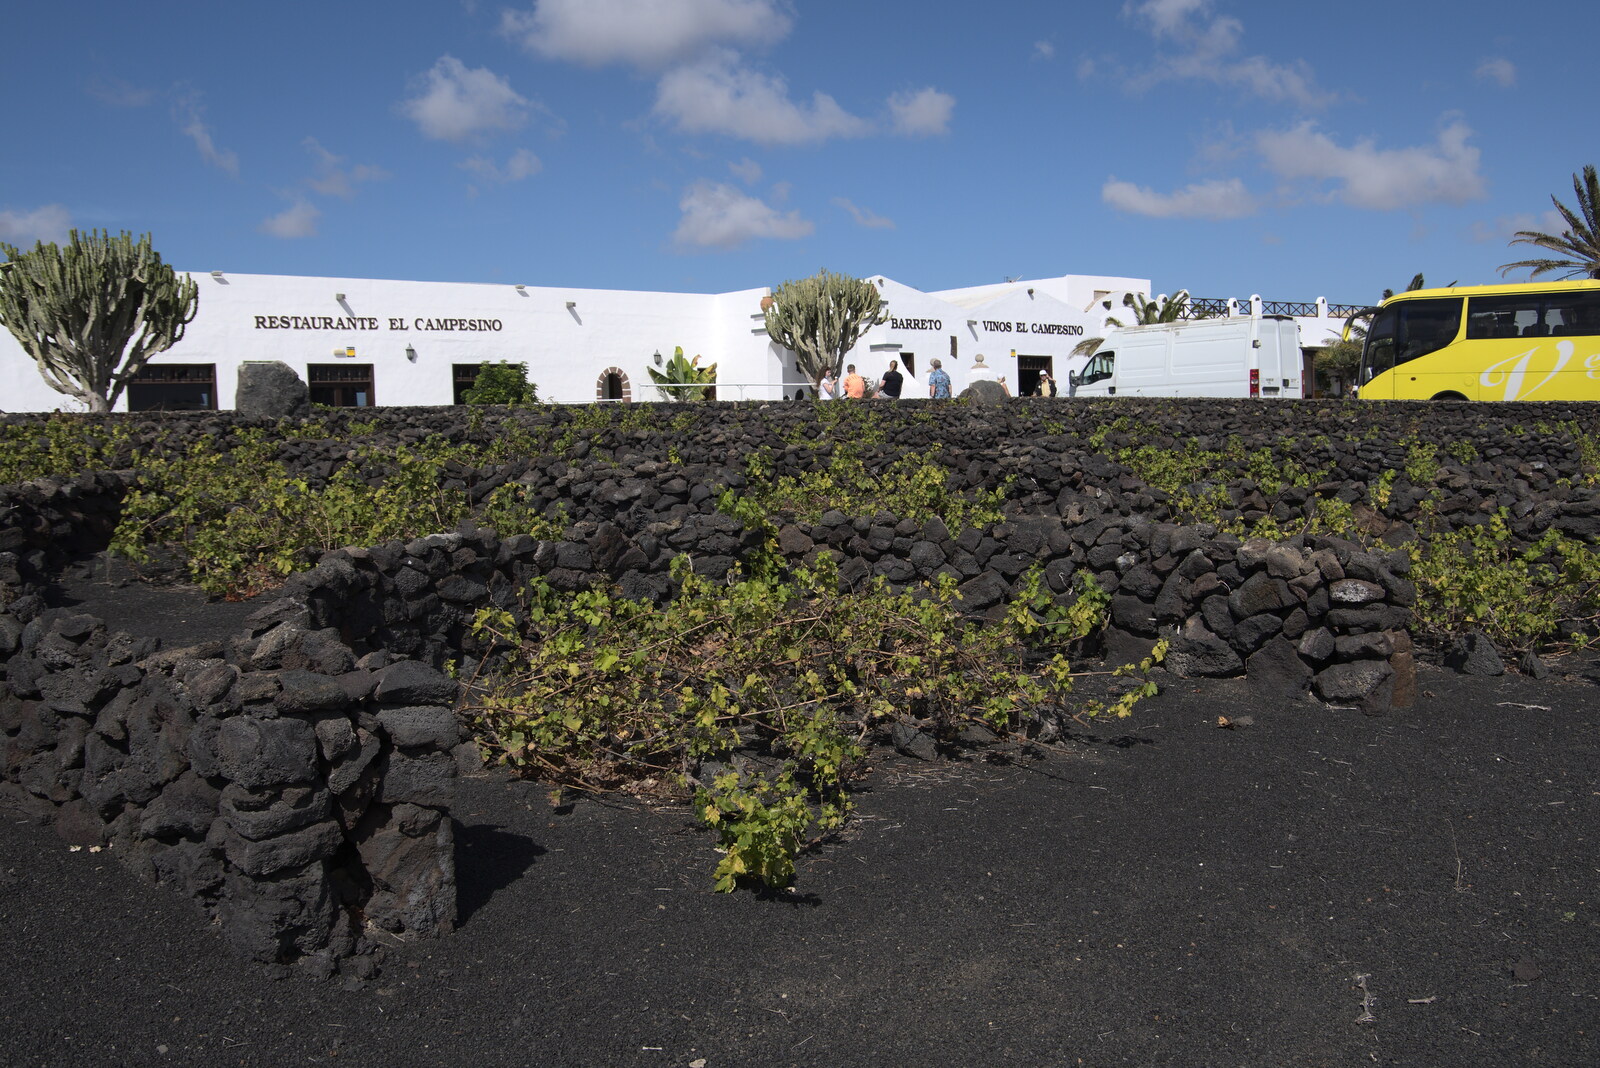 We stop off at the Vinos del Campesino from The Volcanoes of Lanzarote, Canary Islands, Spain - 27th October 2021